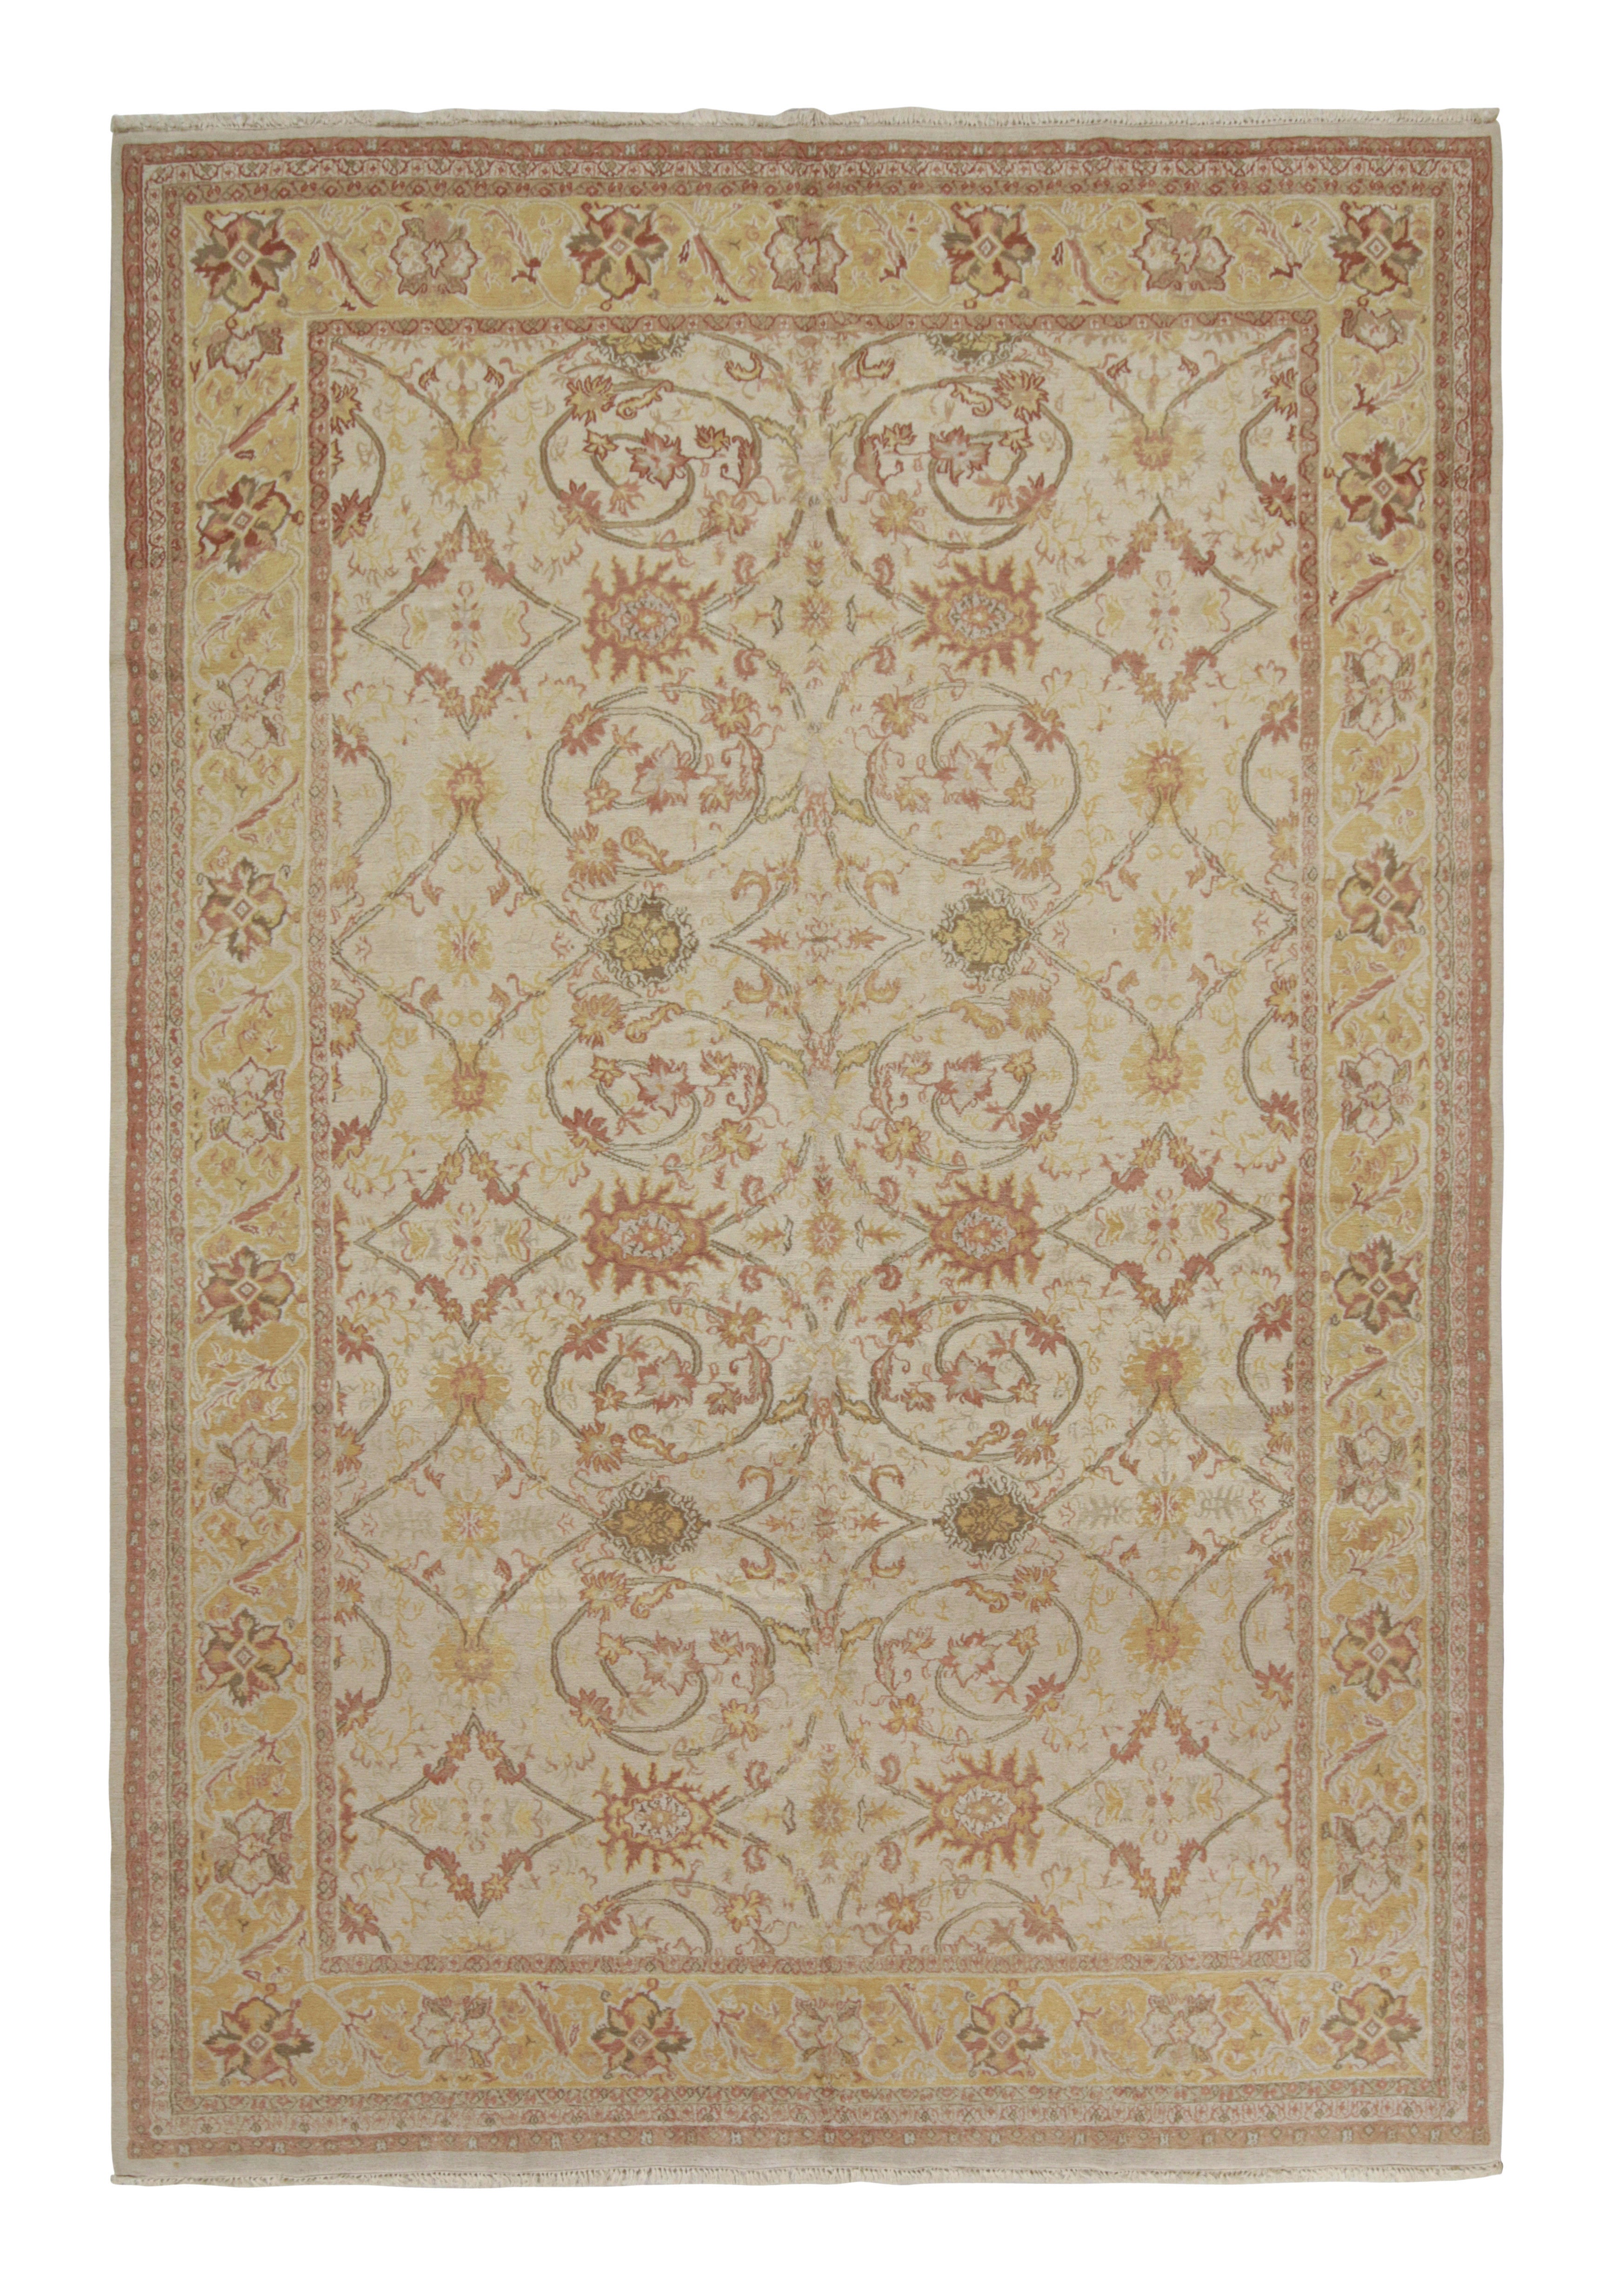 Rug & Kilim’s Sultanabad style rug in Cream with Floral Patterns For Sale